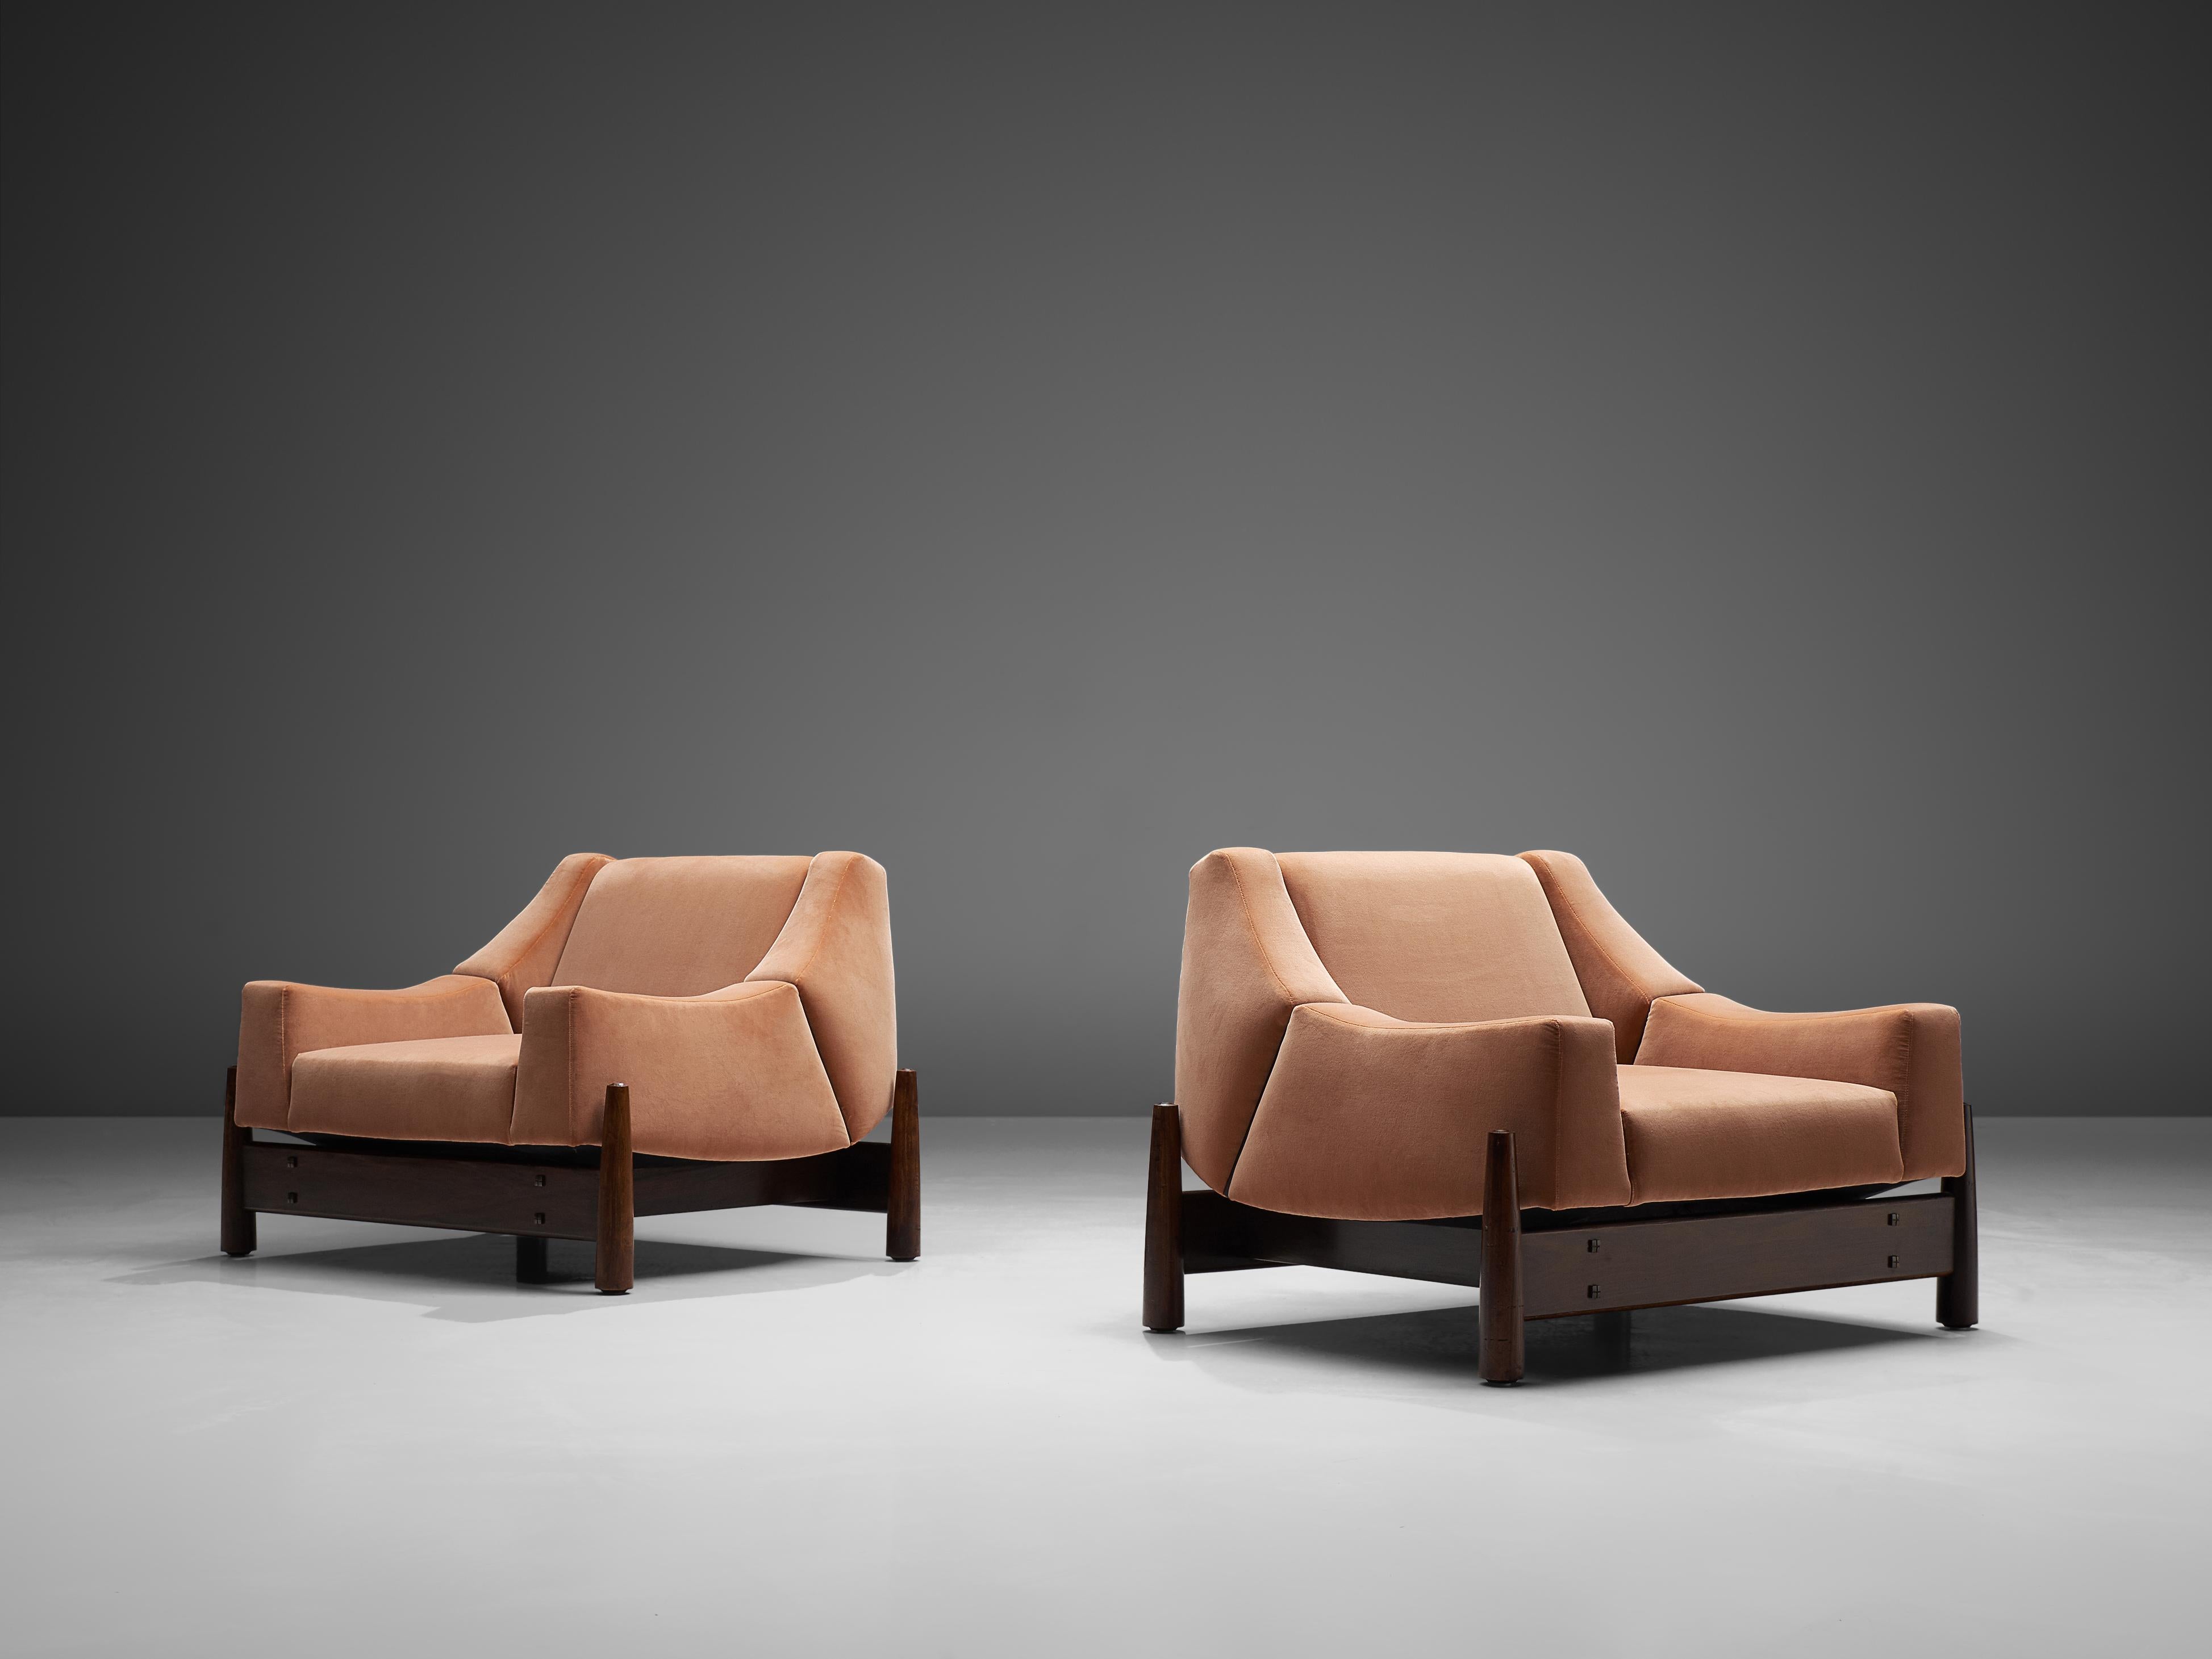 Móveis Cimo, pair of lounge chairs, rosewood and fabric, Brazil, 1950s. 

Pair of Brazilian lounge chairs, designed by Móveis Cimo. These eye catching club chairs feature an organic shaped seat that rests on the wooden frame. The combination of